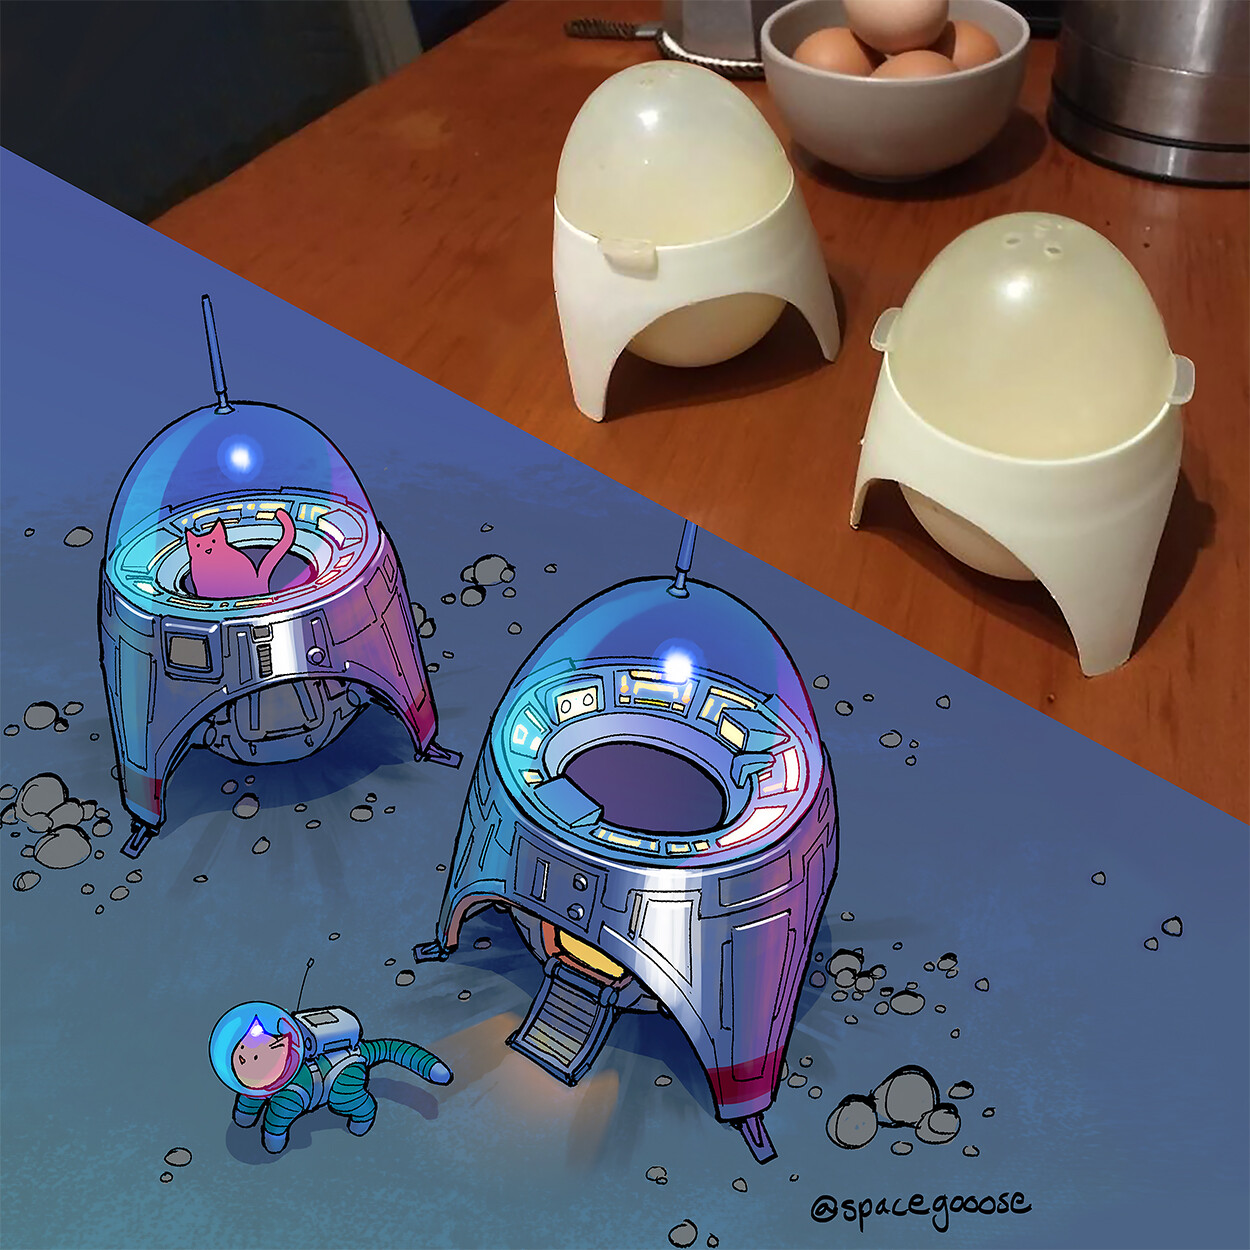 Egg cups as inspiration for space pods